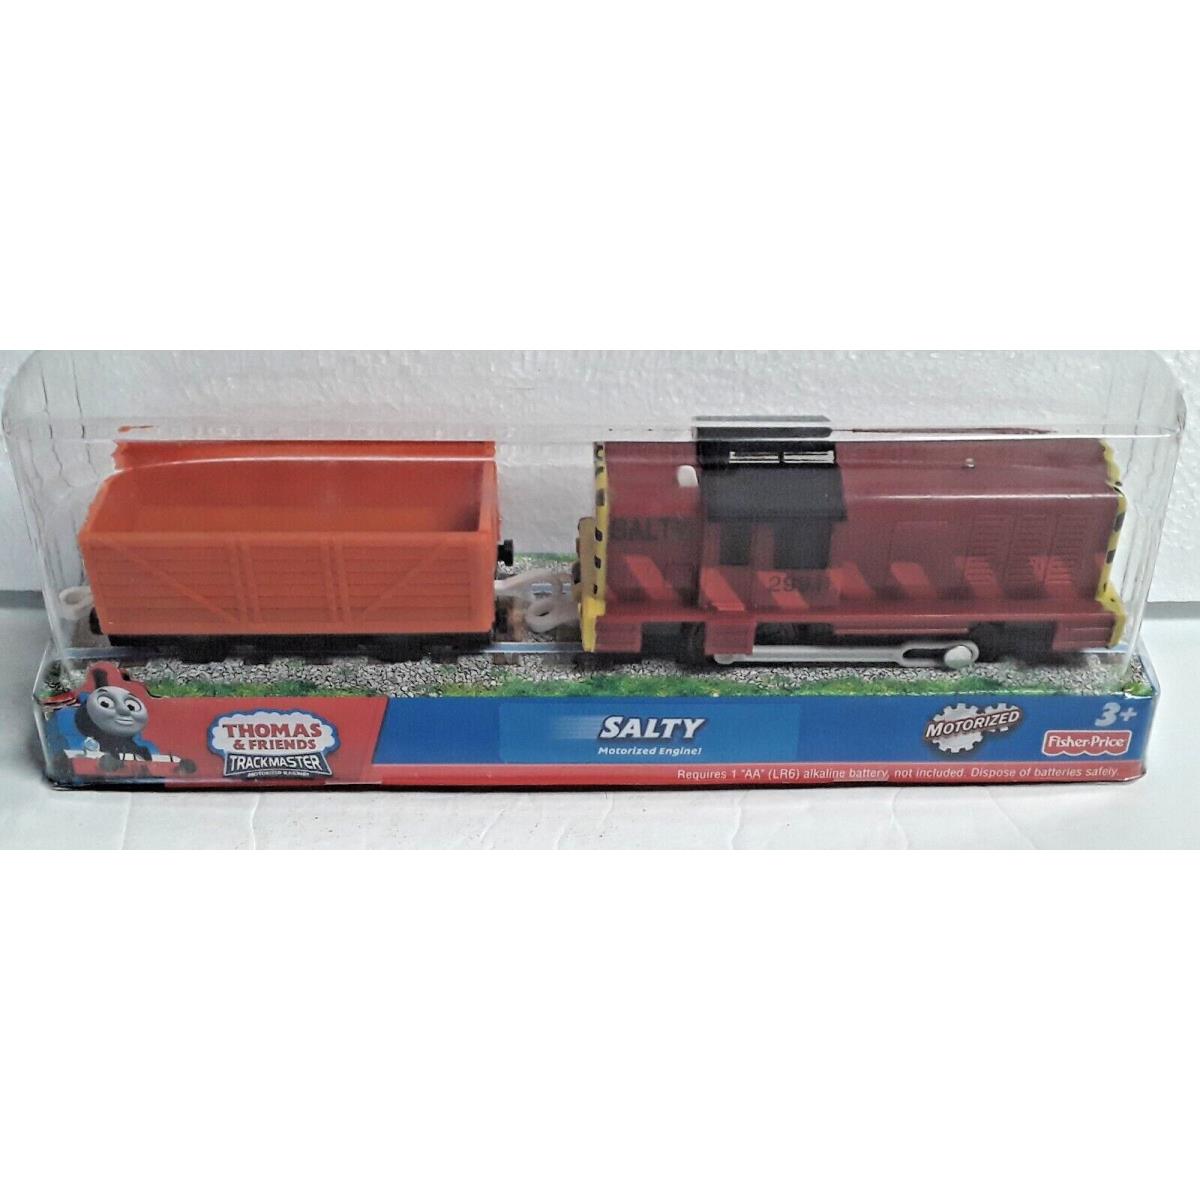 Thomas Friends Red Salty Trackmaster with Orange Car Motorized Train Engine